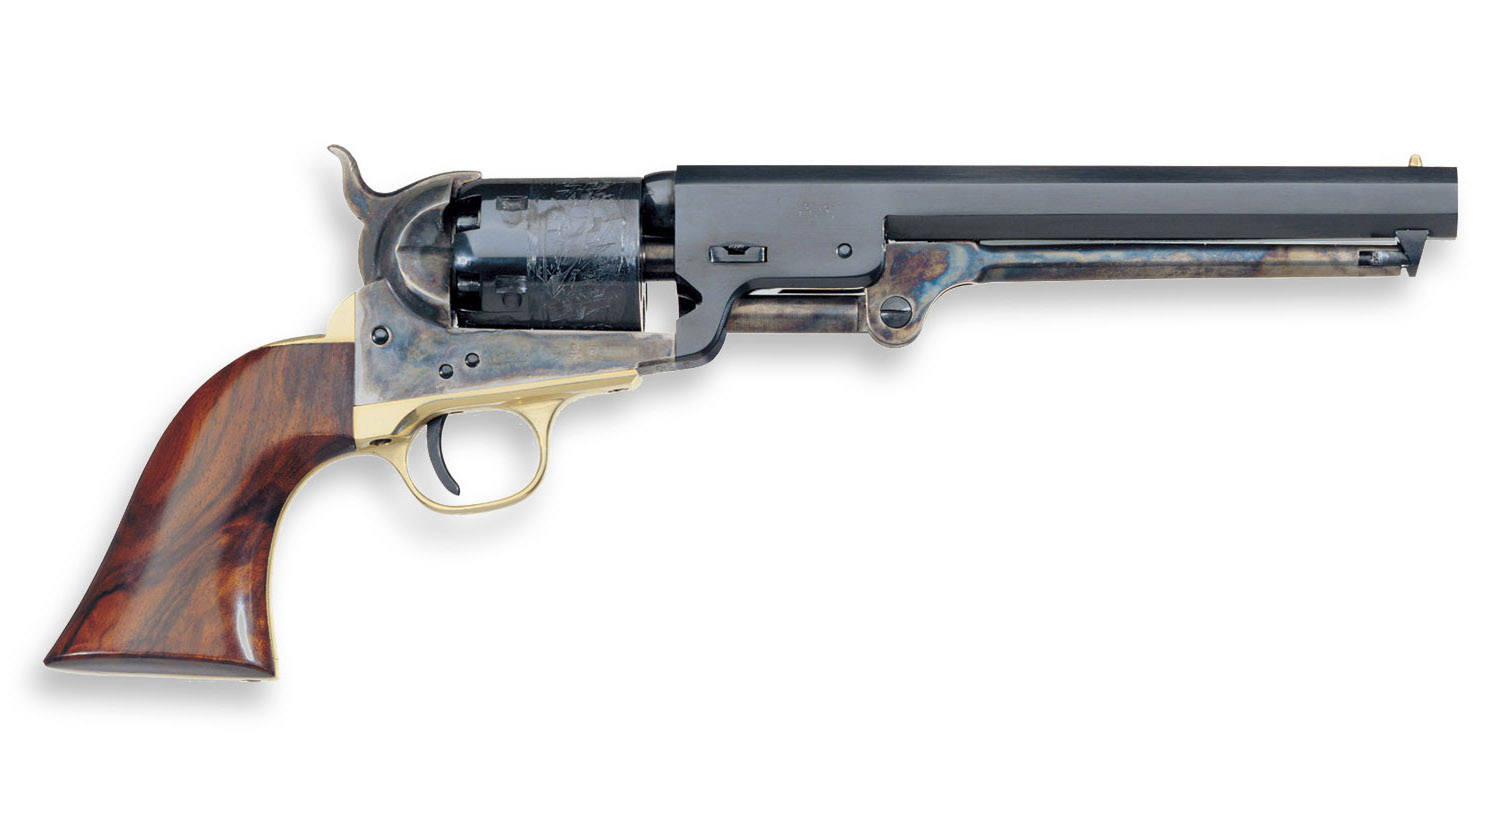 1851 NAVY Uberti Replicas Top Quality Firearms From 1959 